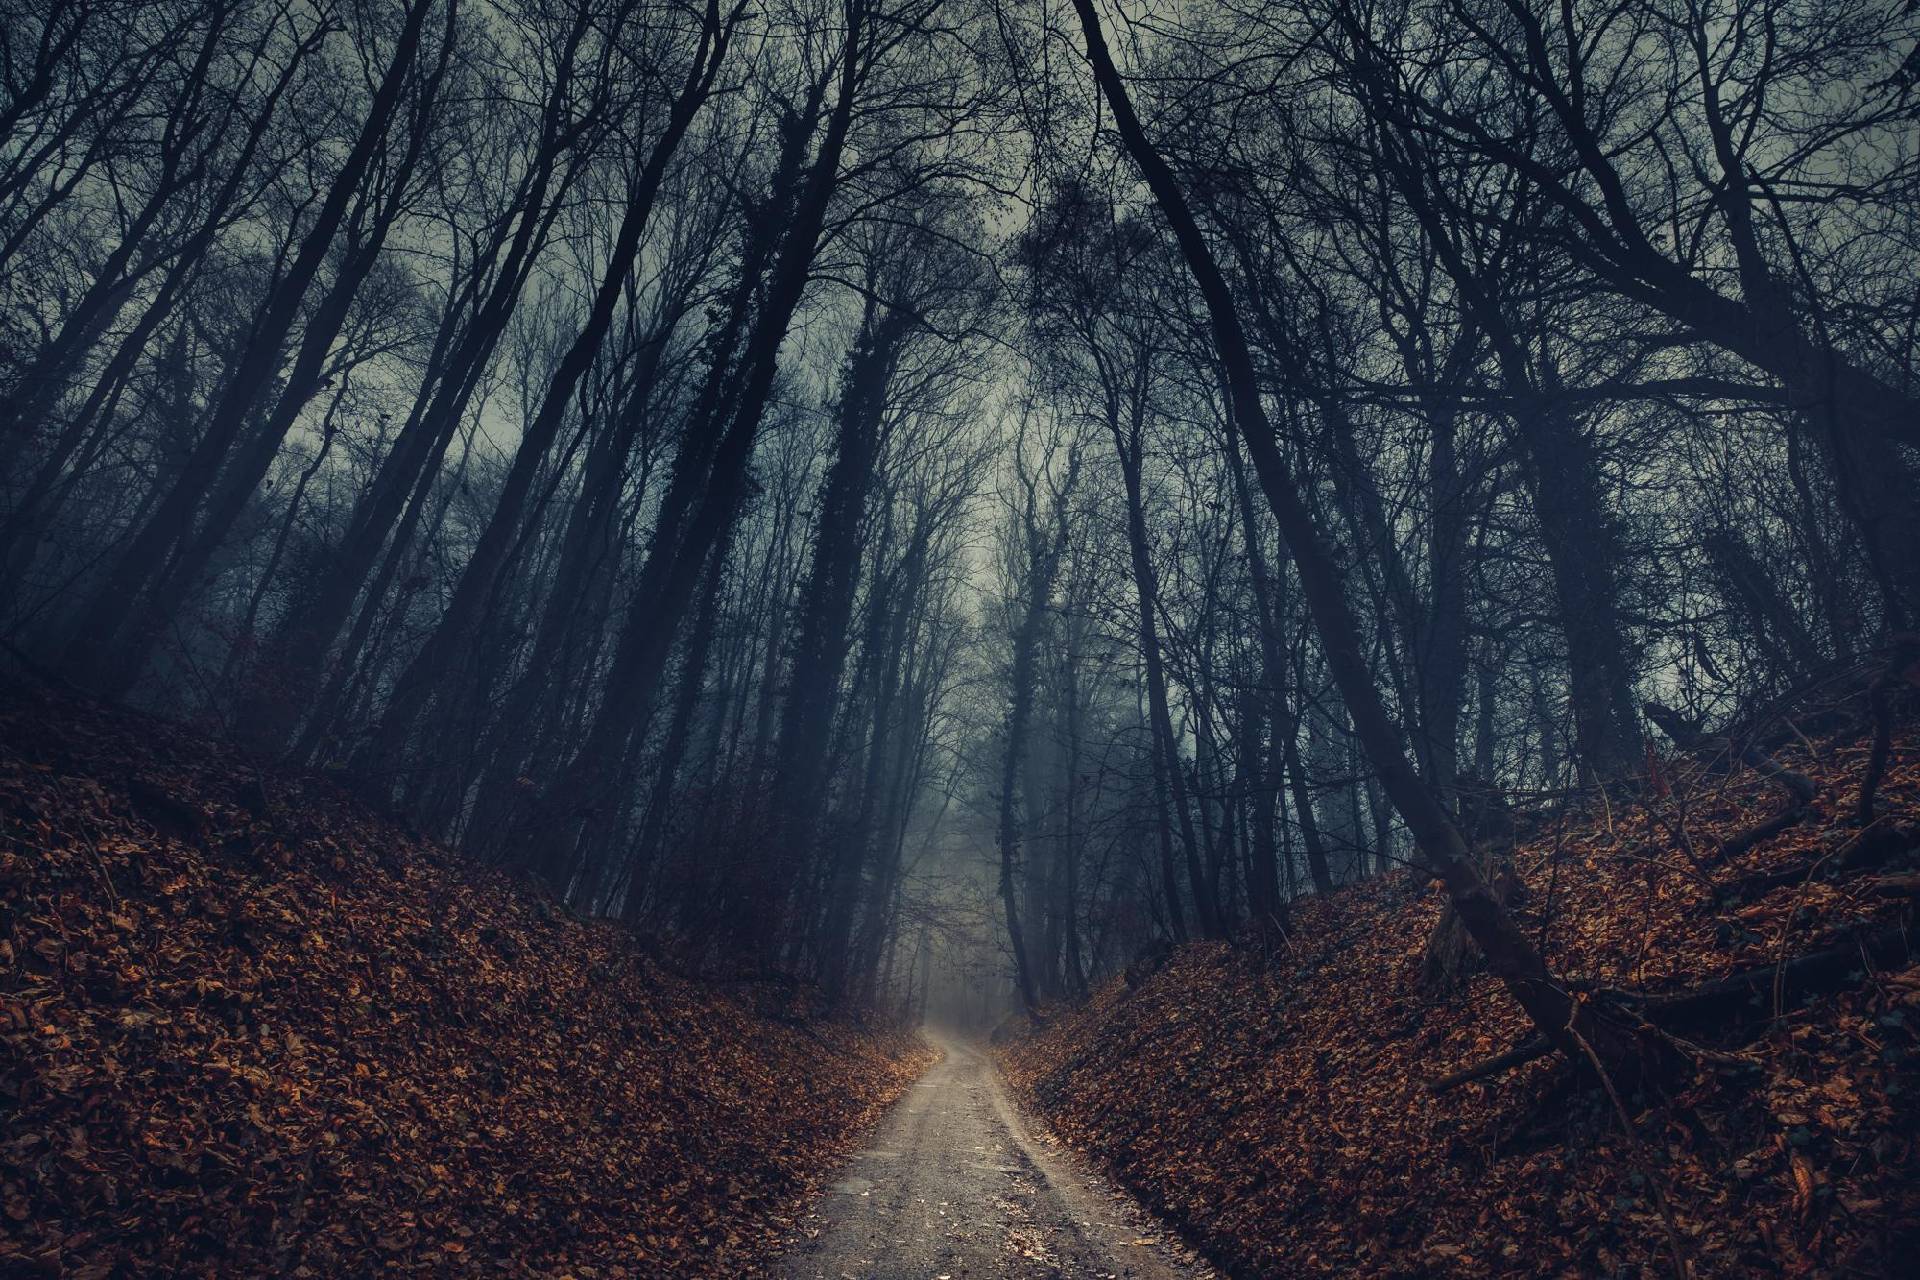 General 1920x1280 nature landscape forest trees mist dirt road fallen leaves branch fall leaves deep forest